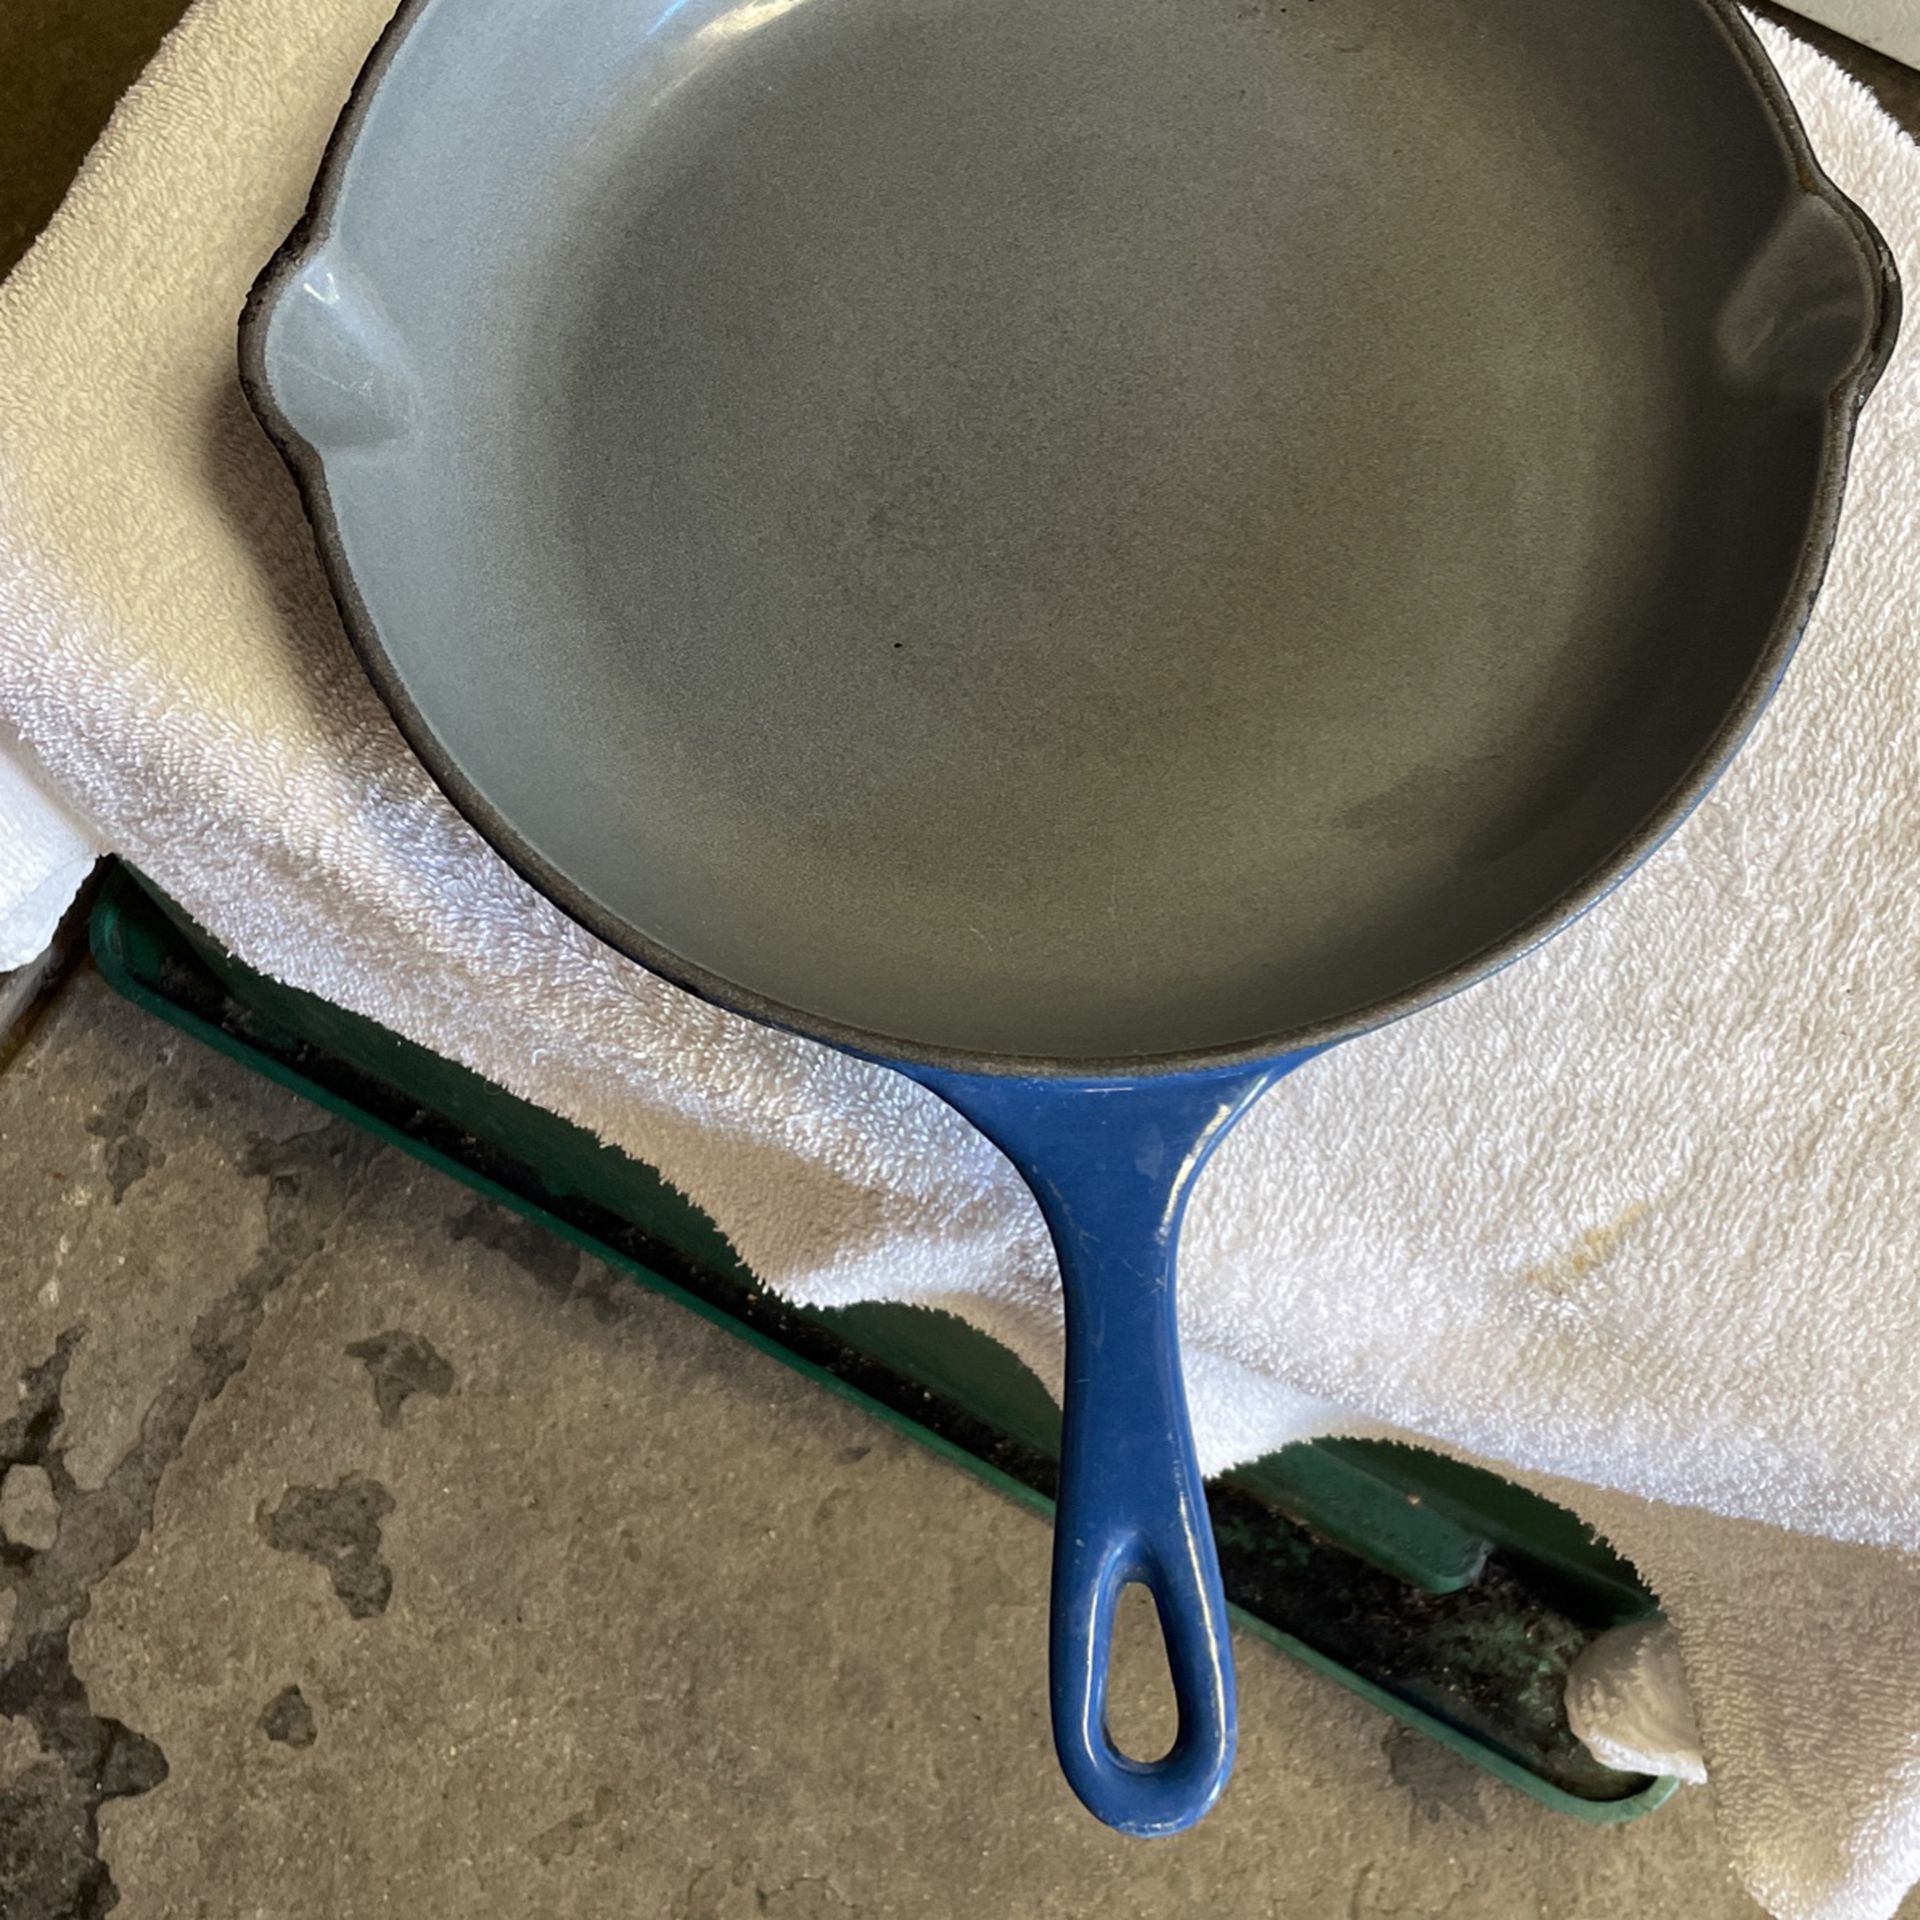 Le Creuset Signature 5-Qt. Ink Blue Cast Iron Everyday Pan for Sale in New  York, New York - OfferUp